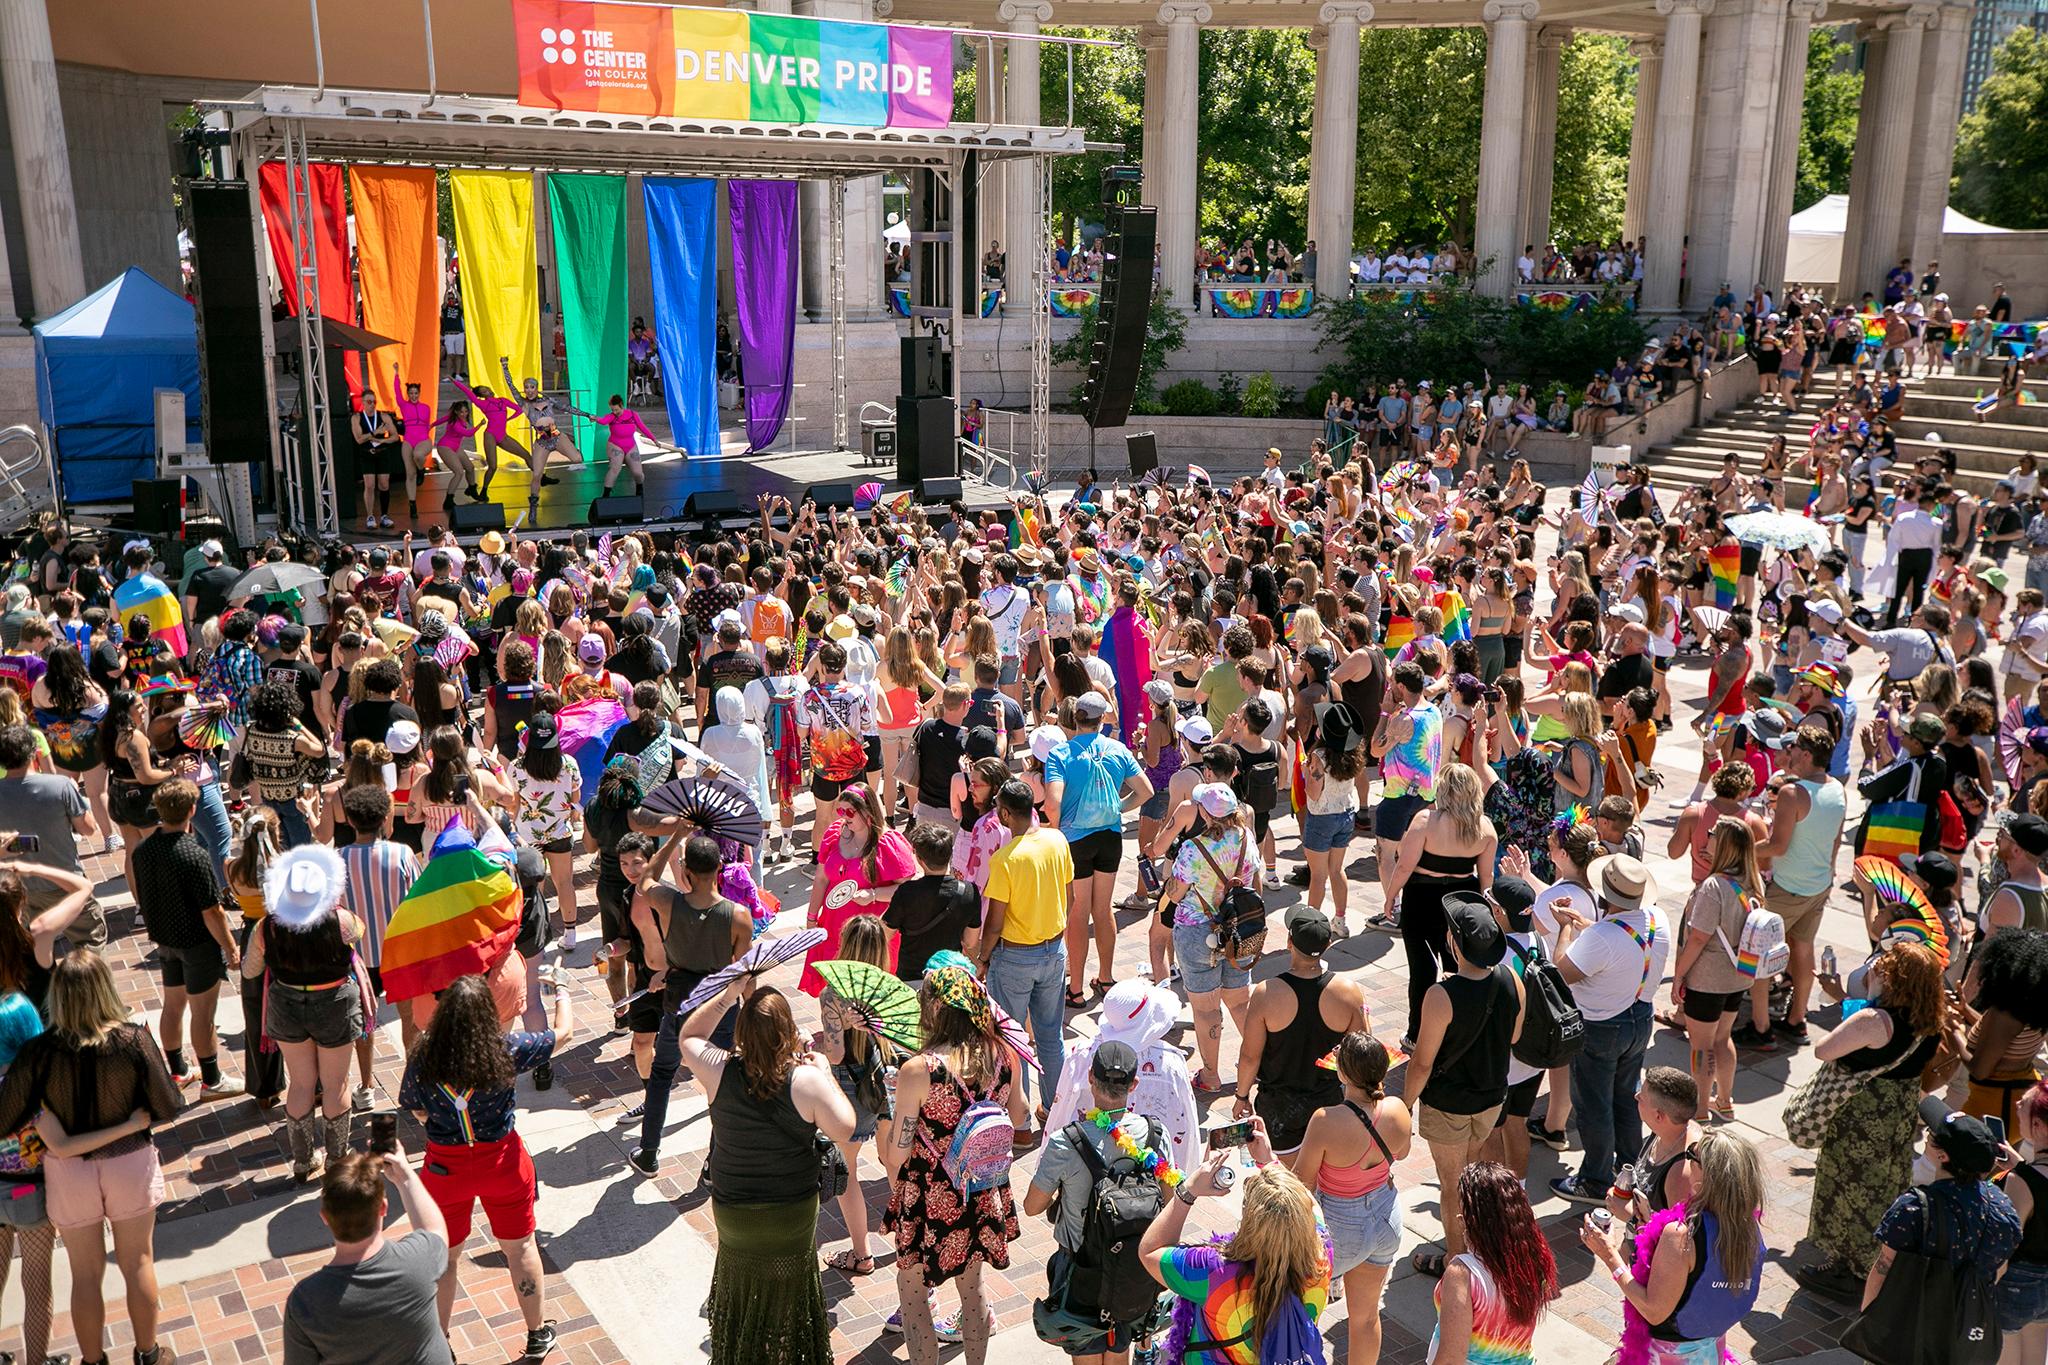 Crowds in Denver's Civic Center Park watch a musical performance on the main PrideFest stage with a background of rainbow banners.